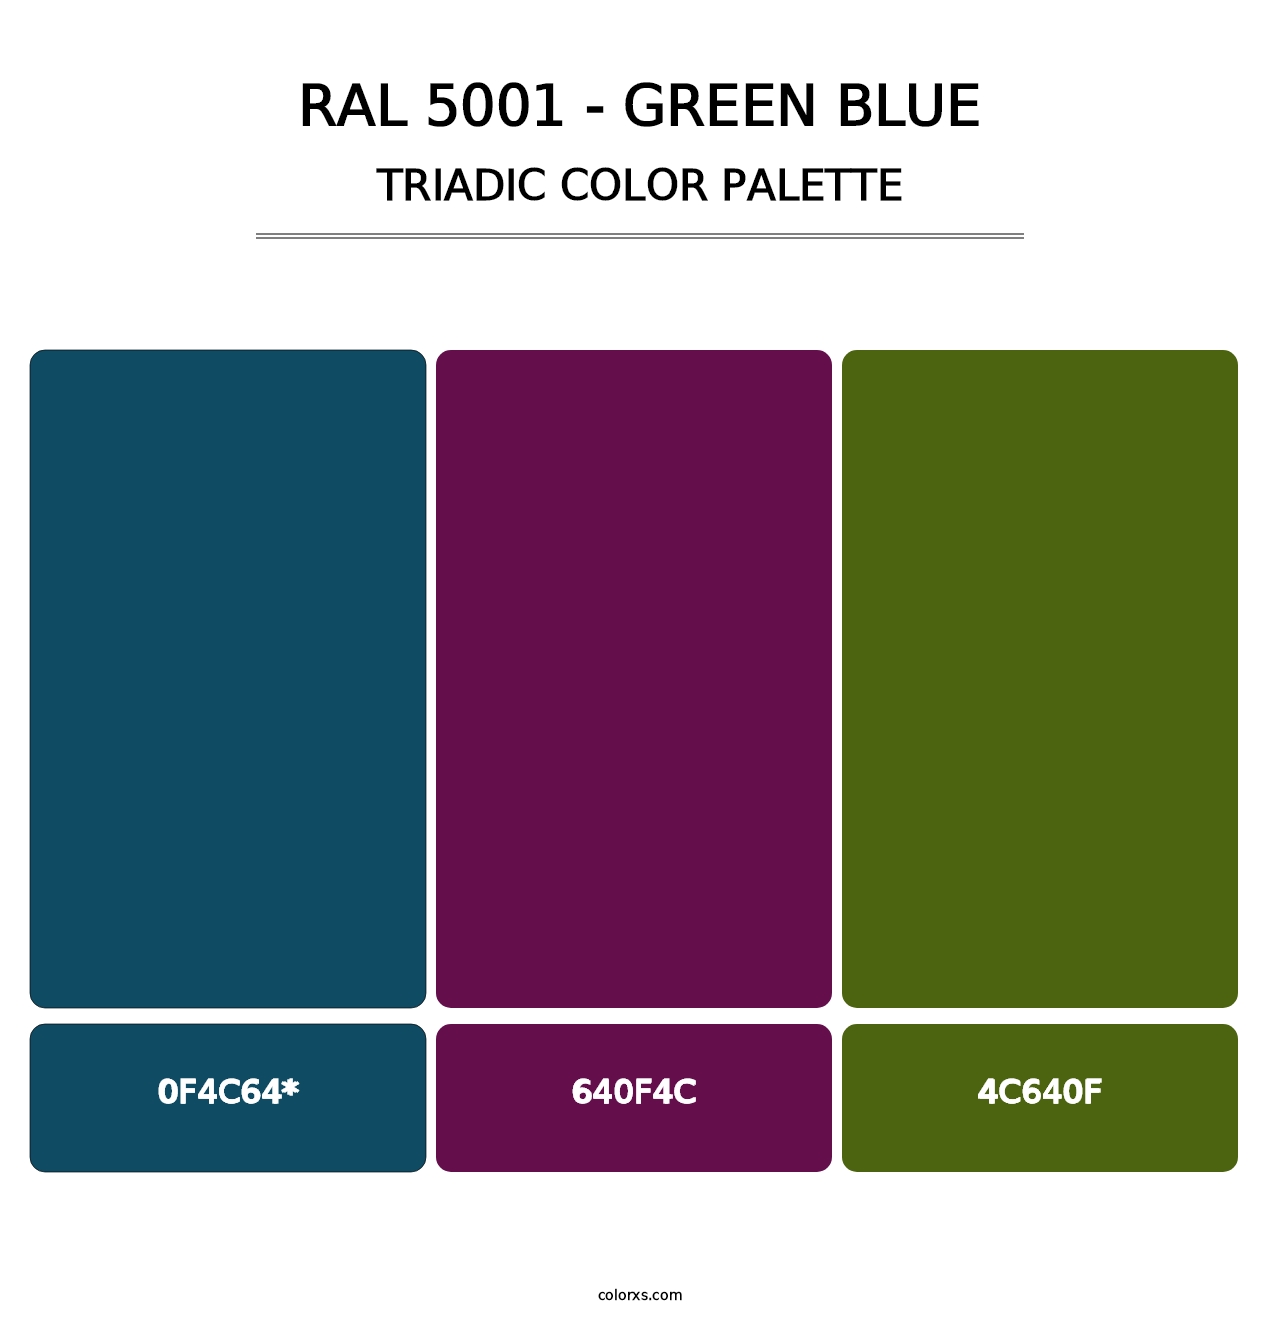 RAL 5001 - Green Blue - Triadic Color Palette